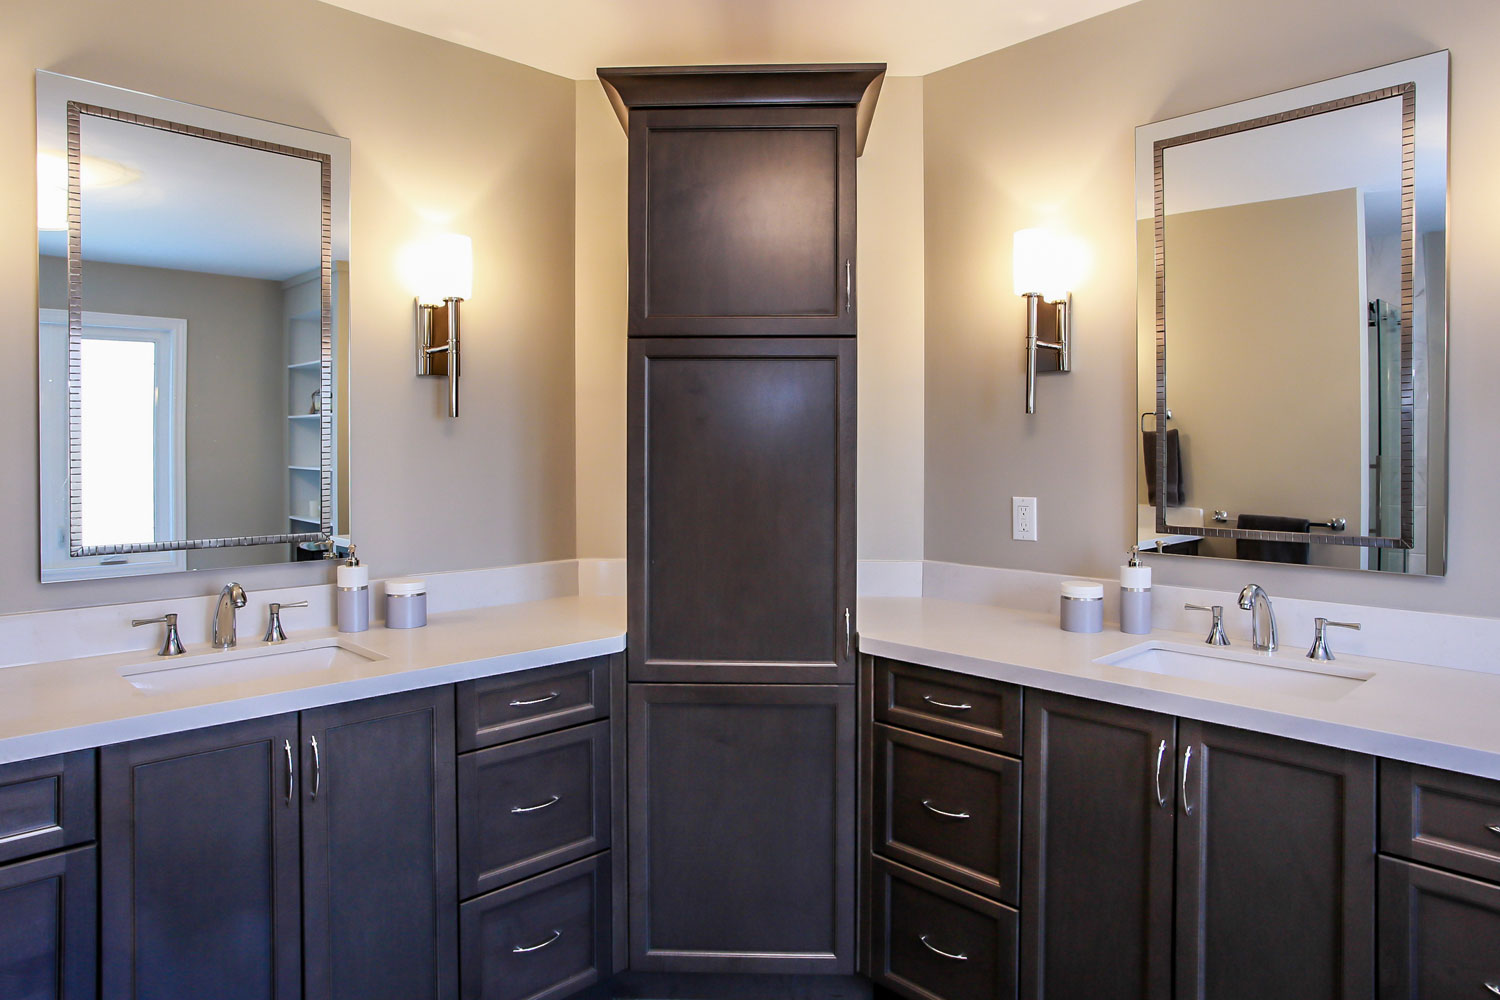 Ensuite renovation with dual vanities - Total Living Concepts barrie ontario